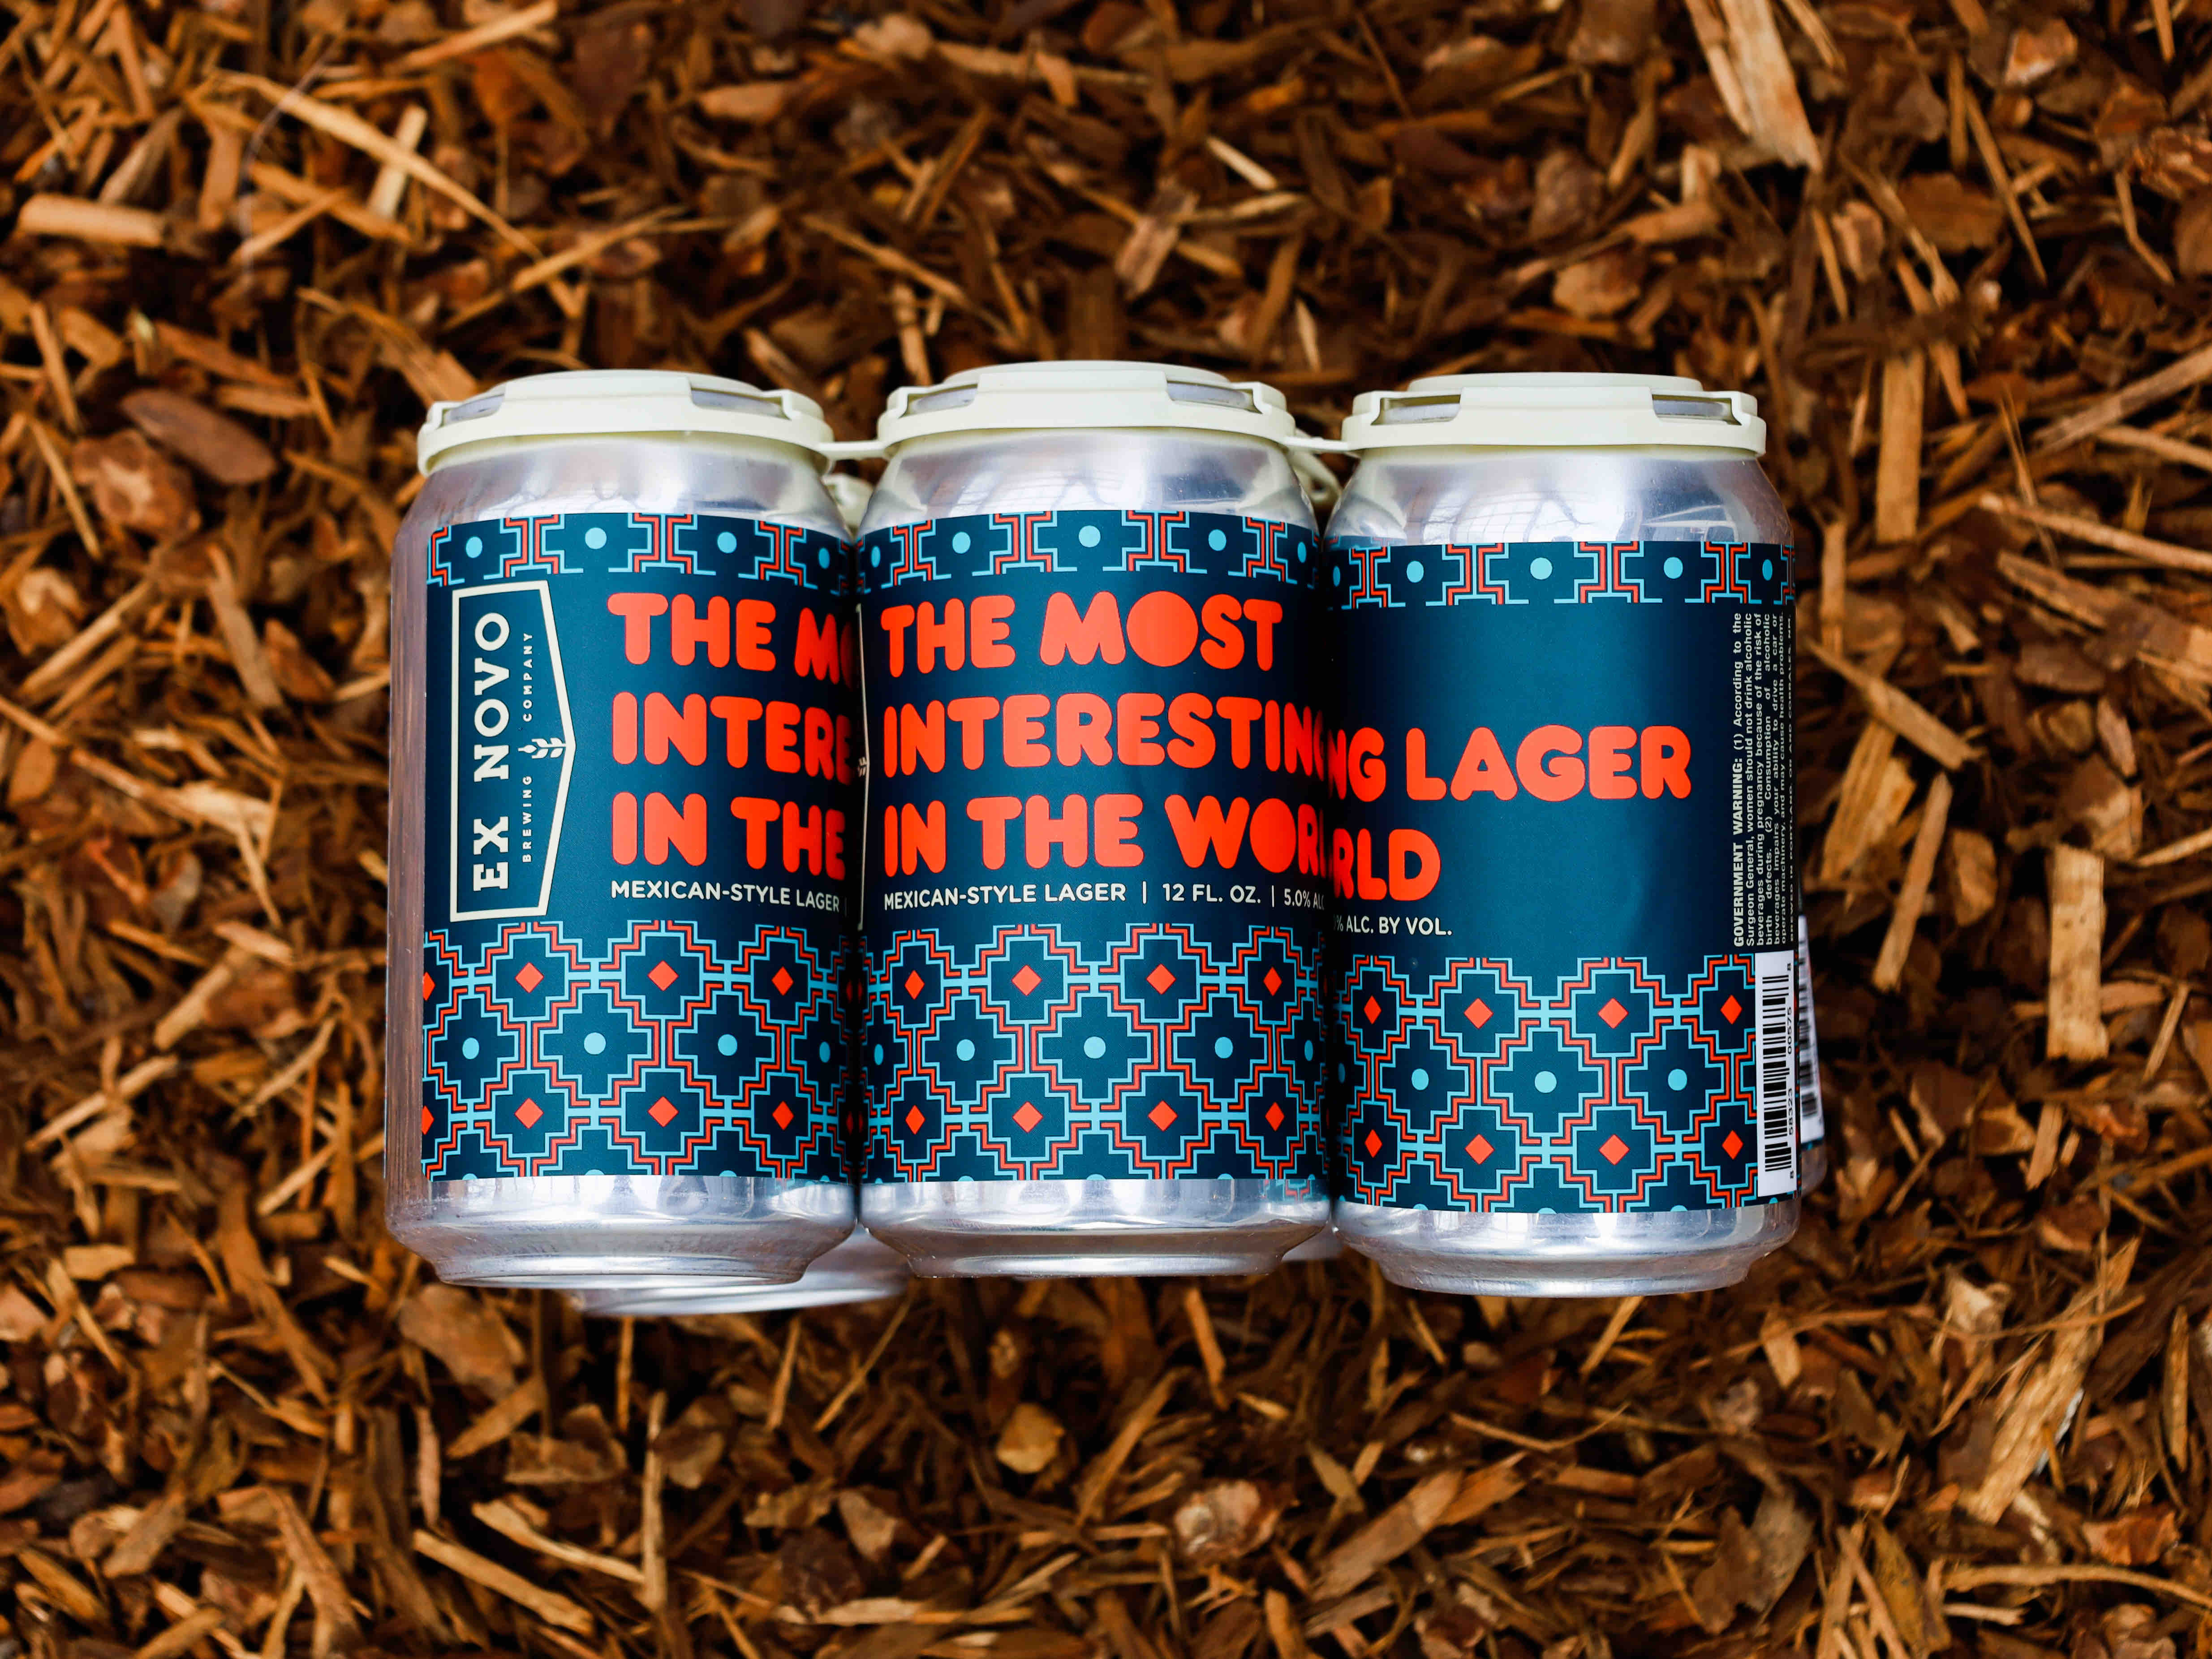 image of The Most Interesting Lager in the World courtesy of Ex Novo Brewing